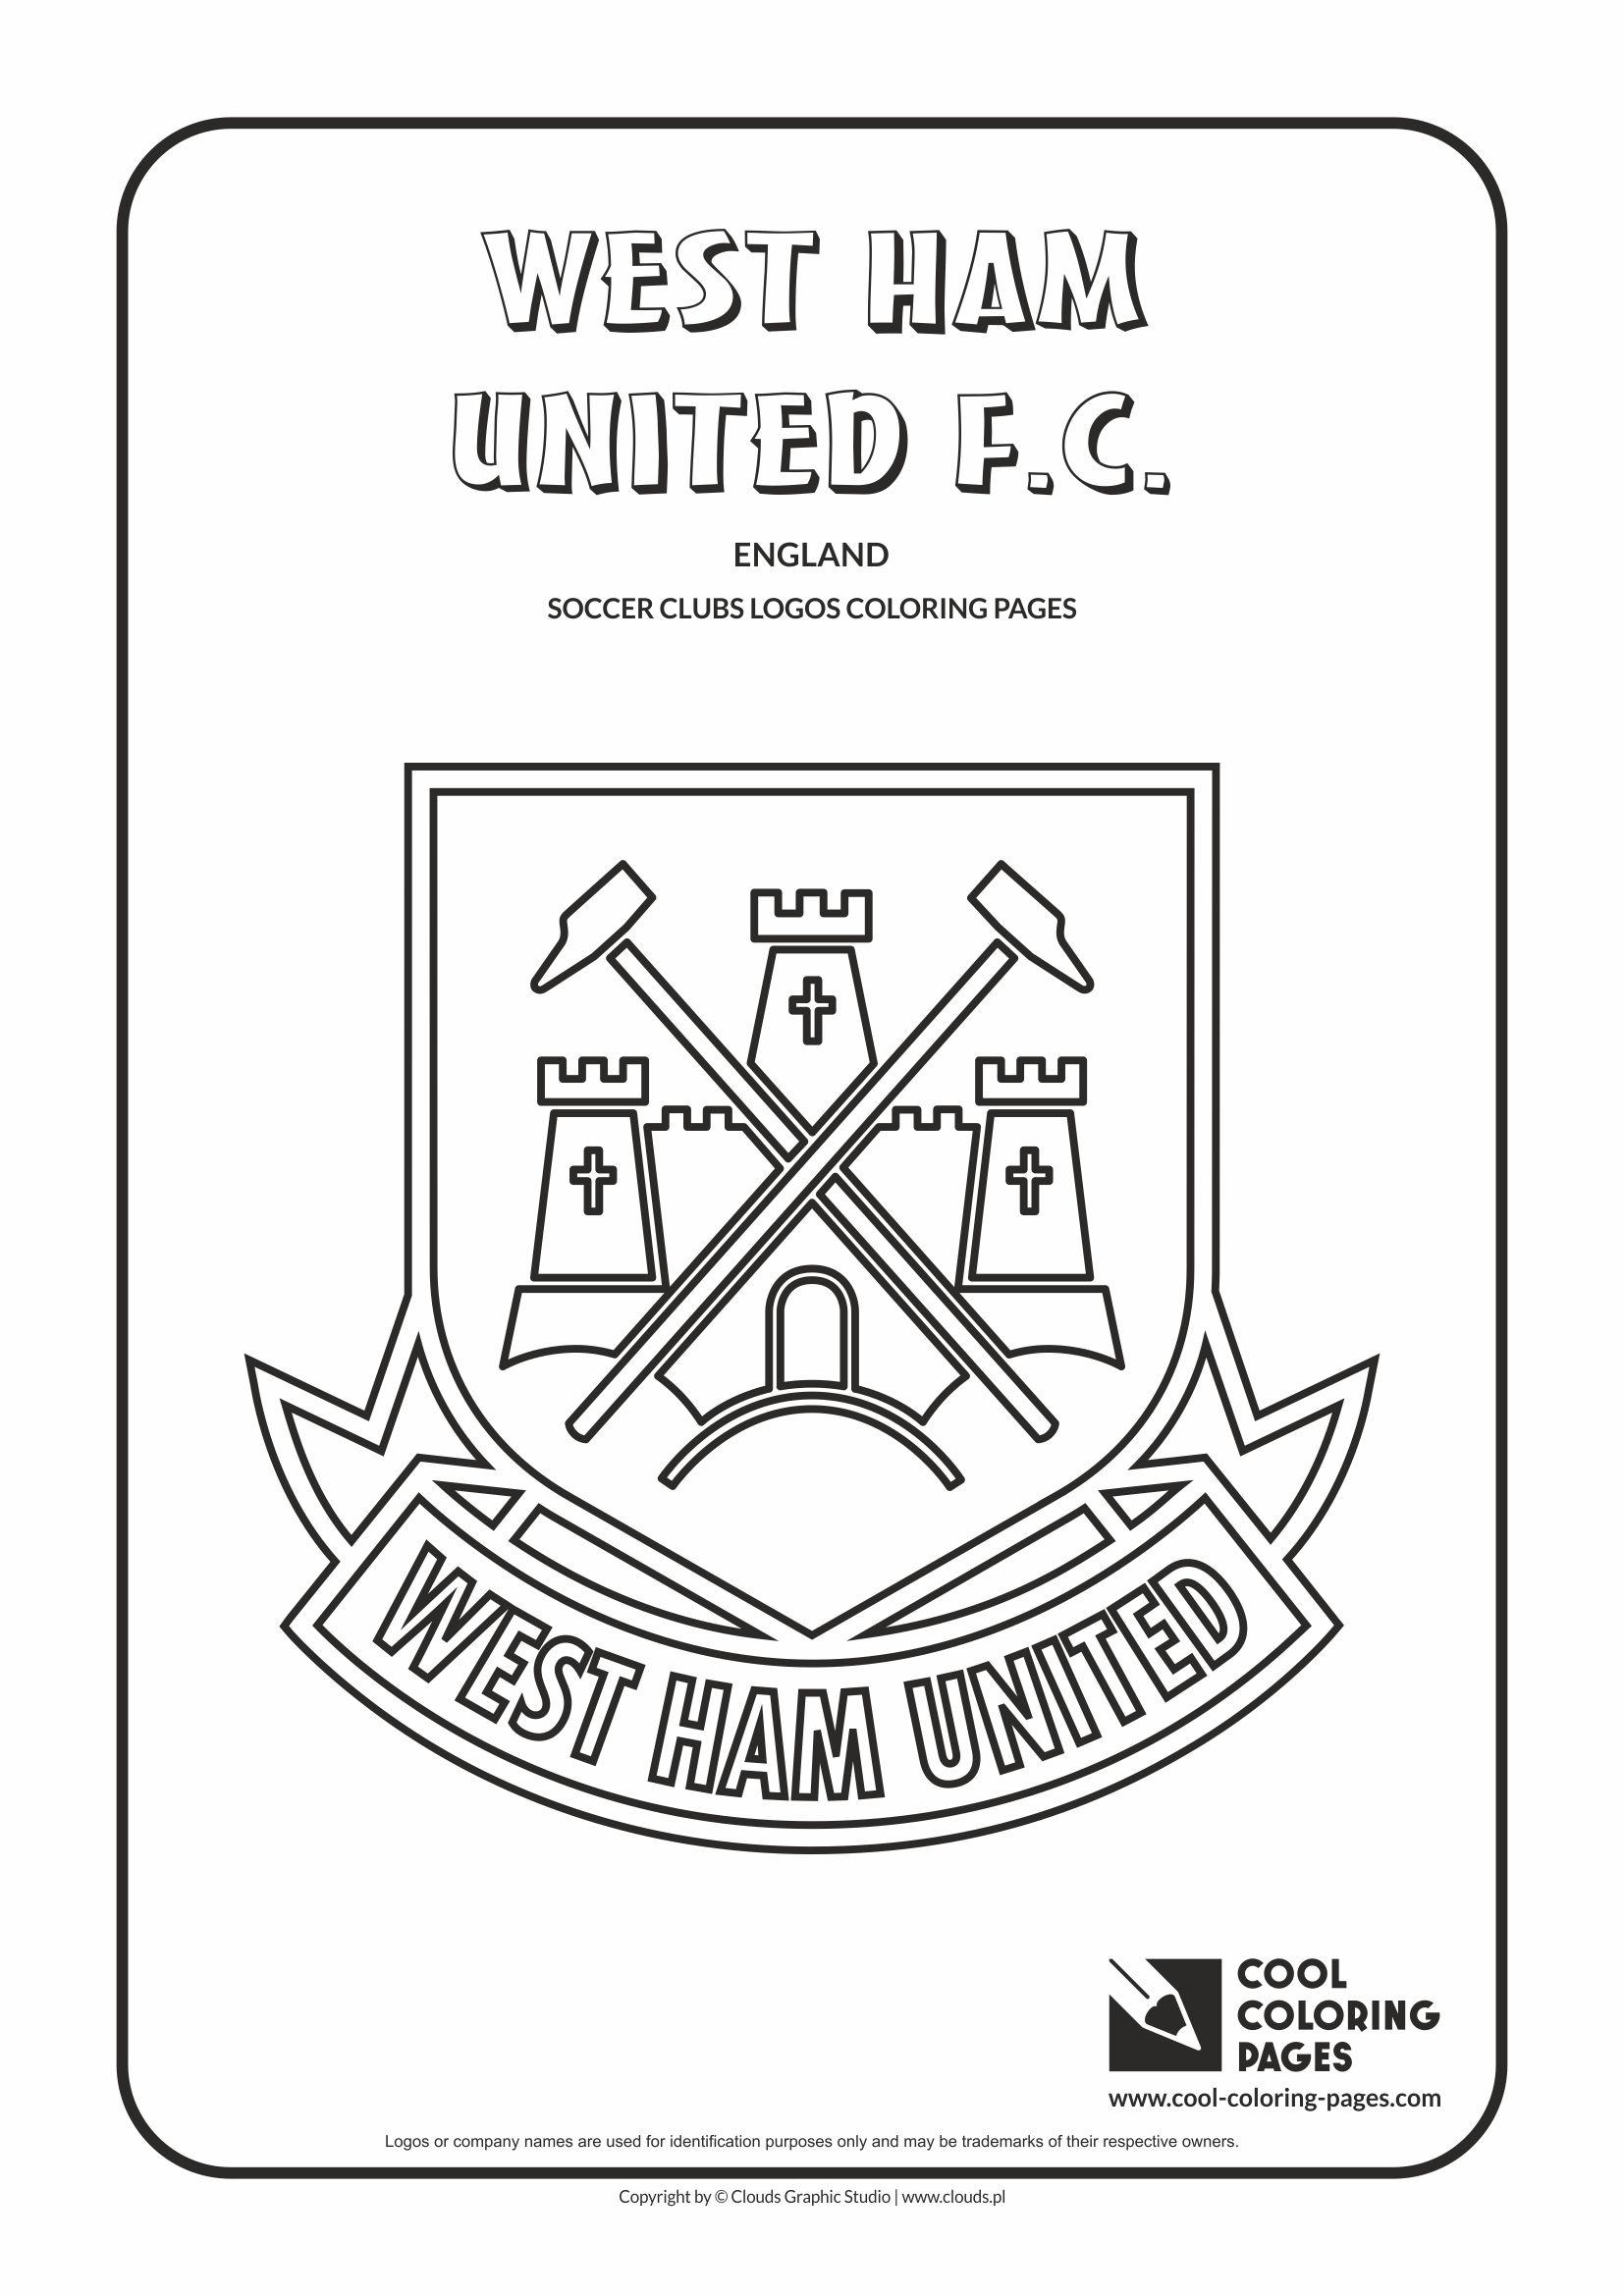 Cool Coloring Pages Soccer clubs logos - Cool Coloring Pages | Free